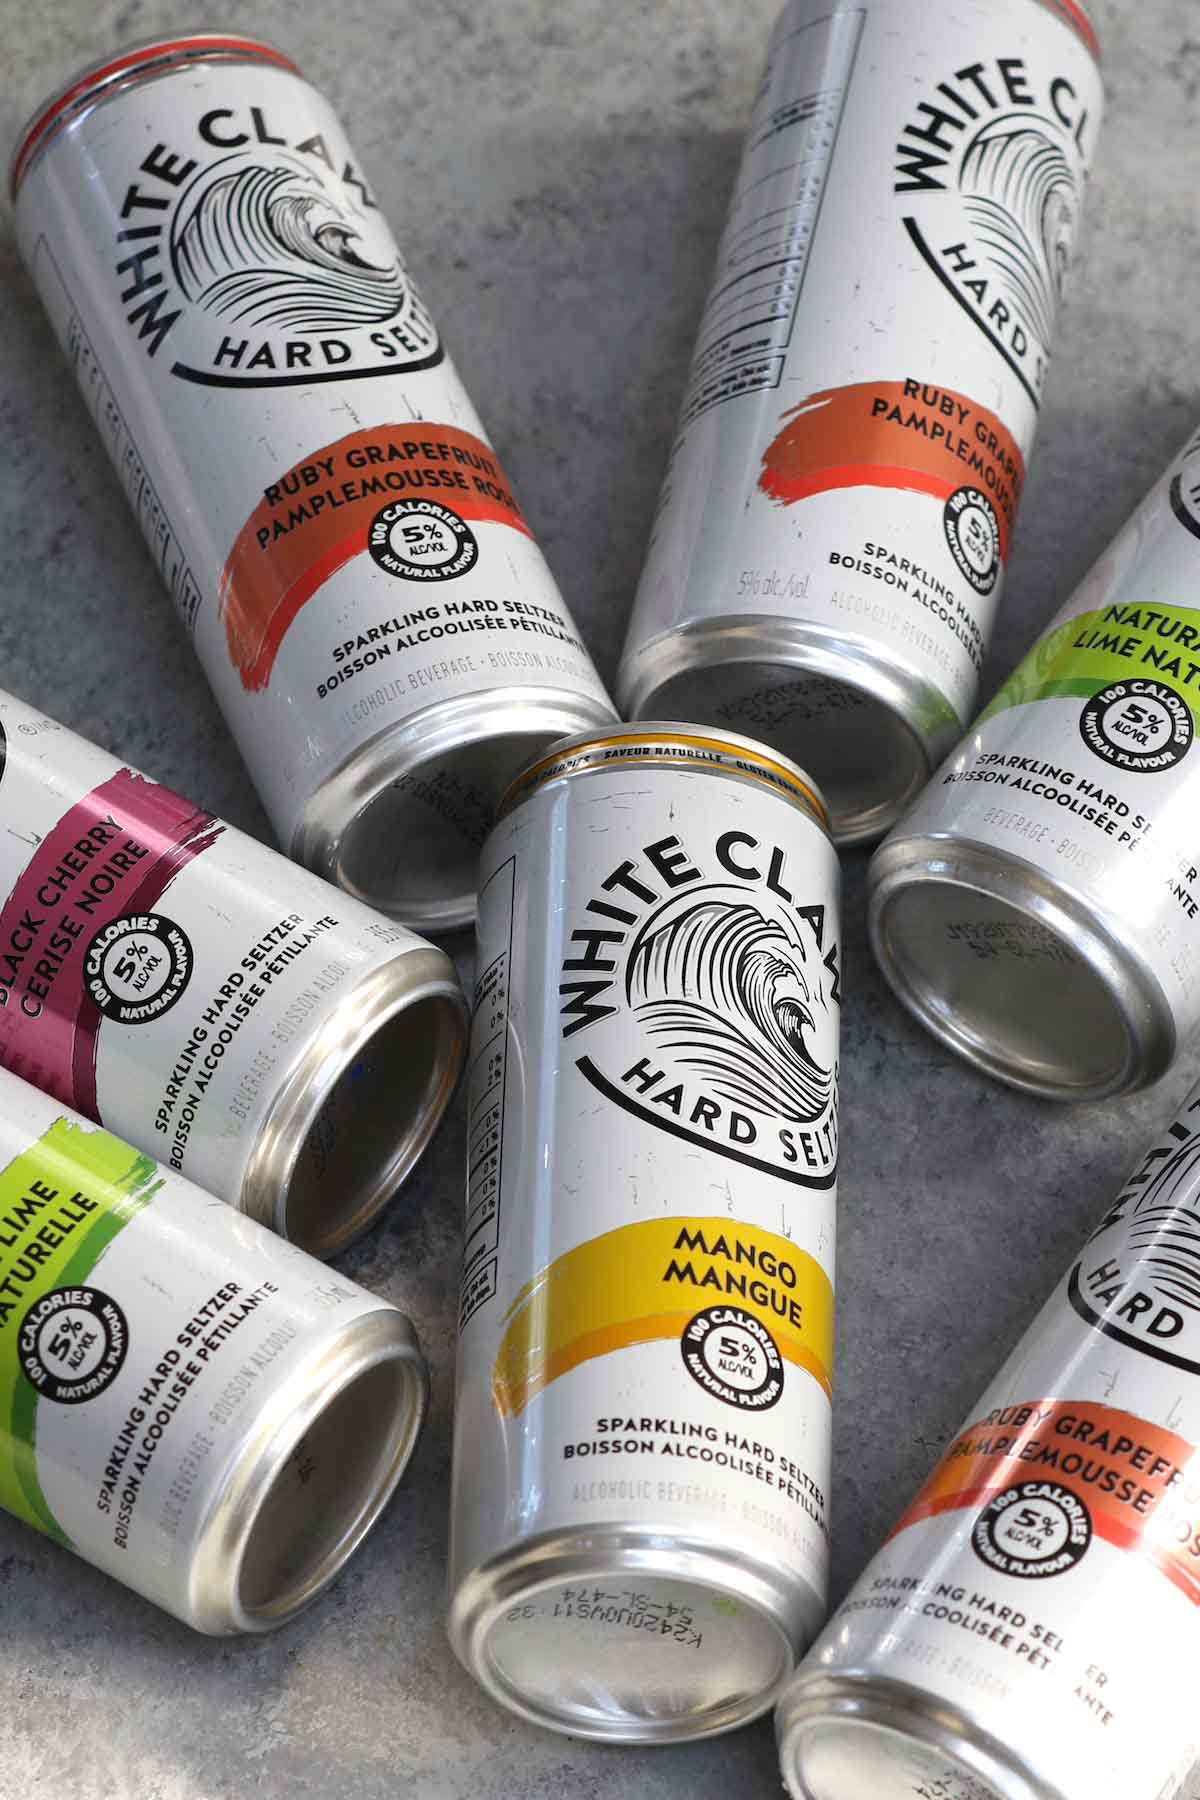 With the combination of seltzer water, a hint of fruit, and a dash of alcohol, White Claw is the perfect refreshing boozy beverage that we all love! After White Claw introduced Tangerine, Watermelon and Lemon in March 2020, strawberry, pineapple, and blackberry will join the White Claw Hard Seltzer Flavors in the new variety pack. Which flavor is best? Our favorites are still mango and black cherry. 